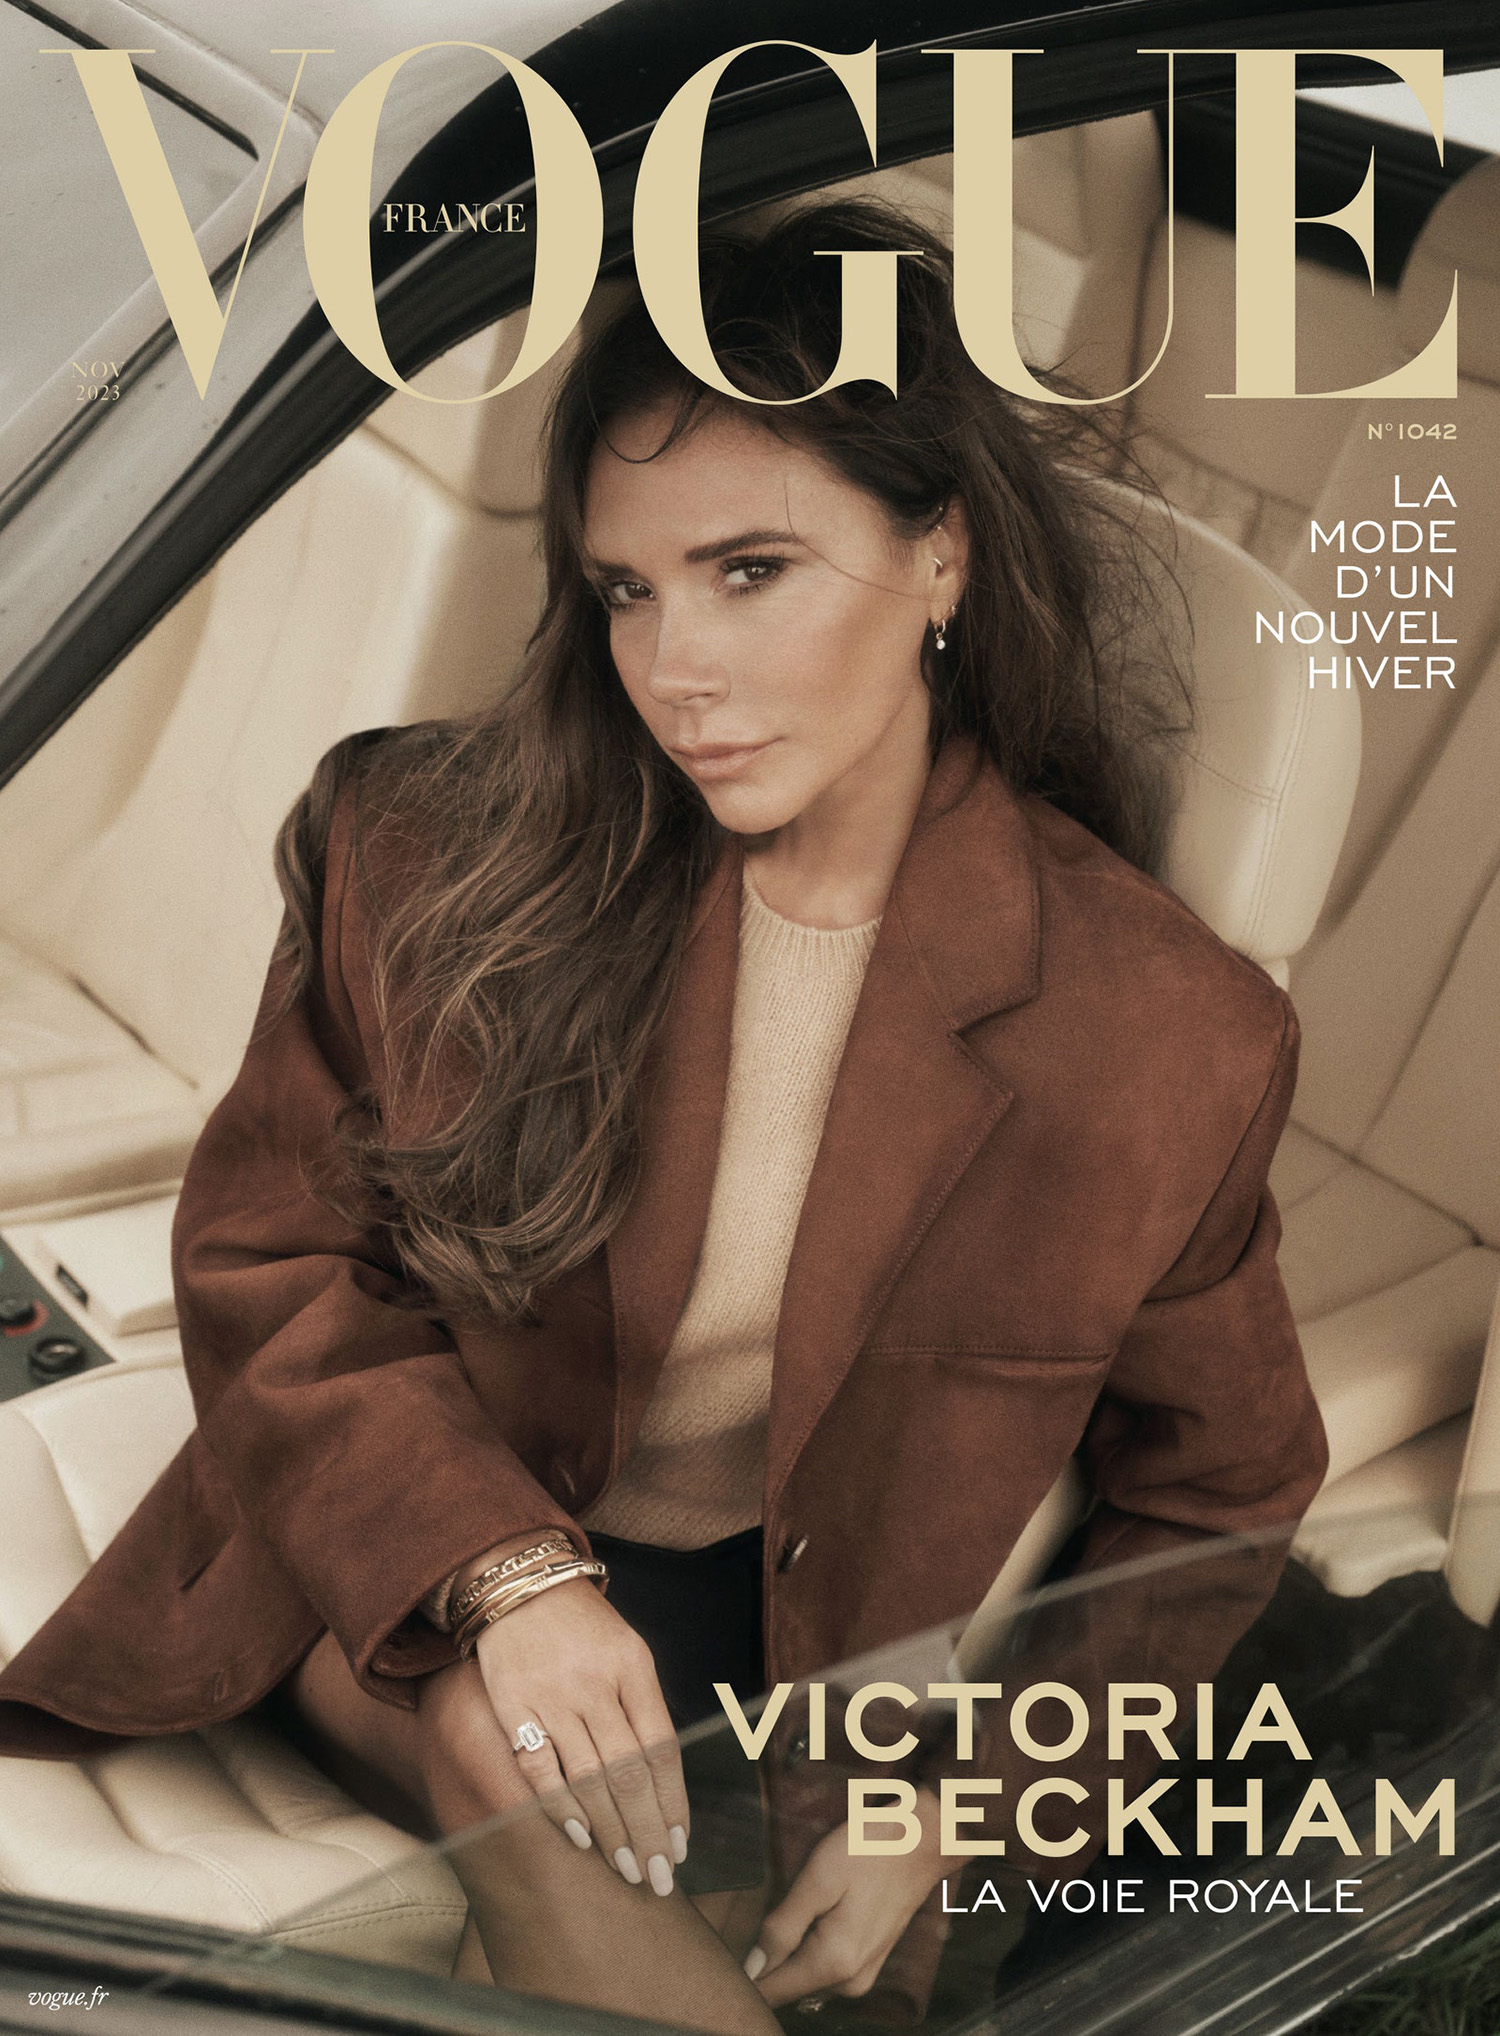 Victoria Beckham covers Vogue France November 2023 by Lachlan Bailey